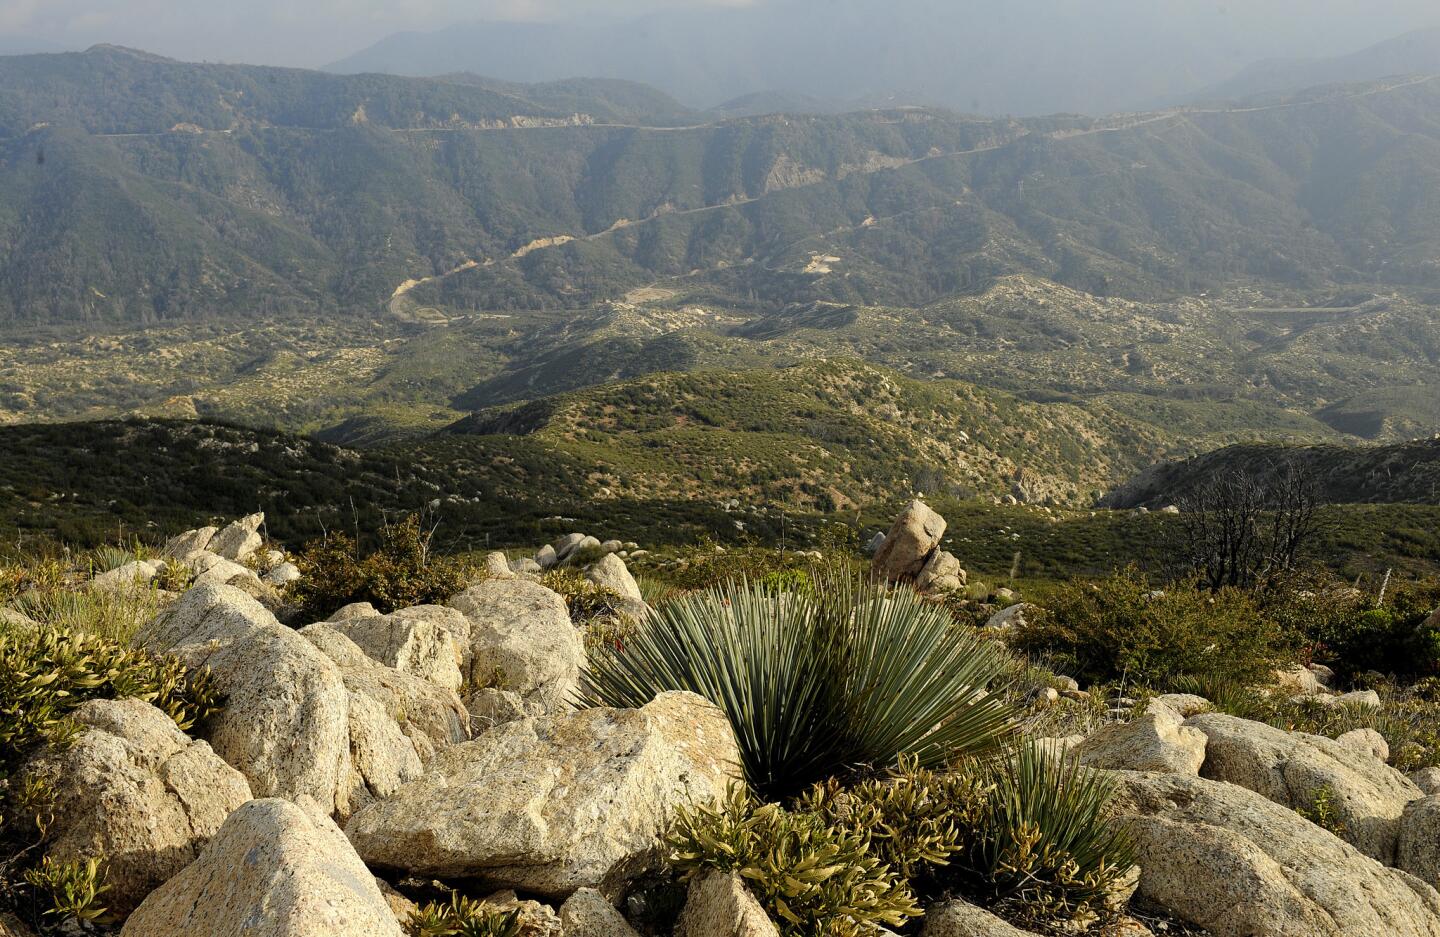 At the high point of the hike in the Angeles National Forest, about 35 miles northeast of downtown L.A., there are 360-degree views. On a clear day, you can see Mt. Wilson, downtown and even the ocean.